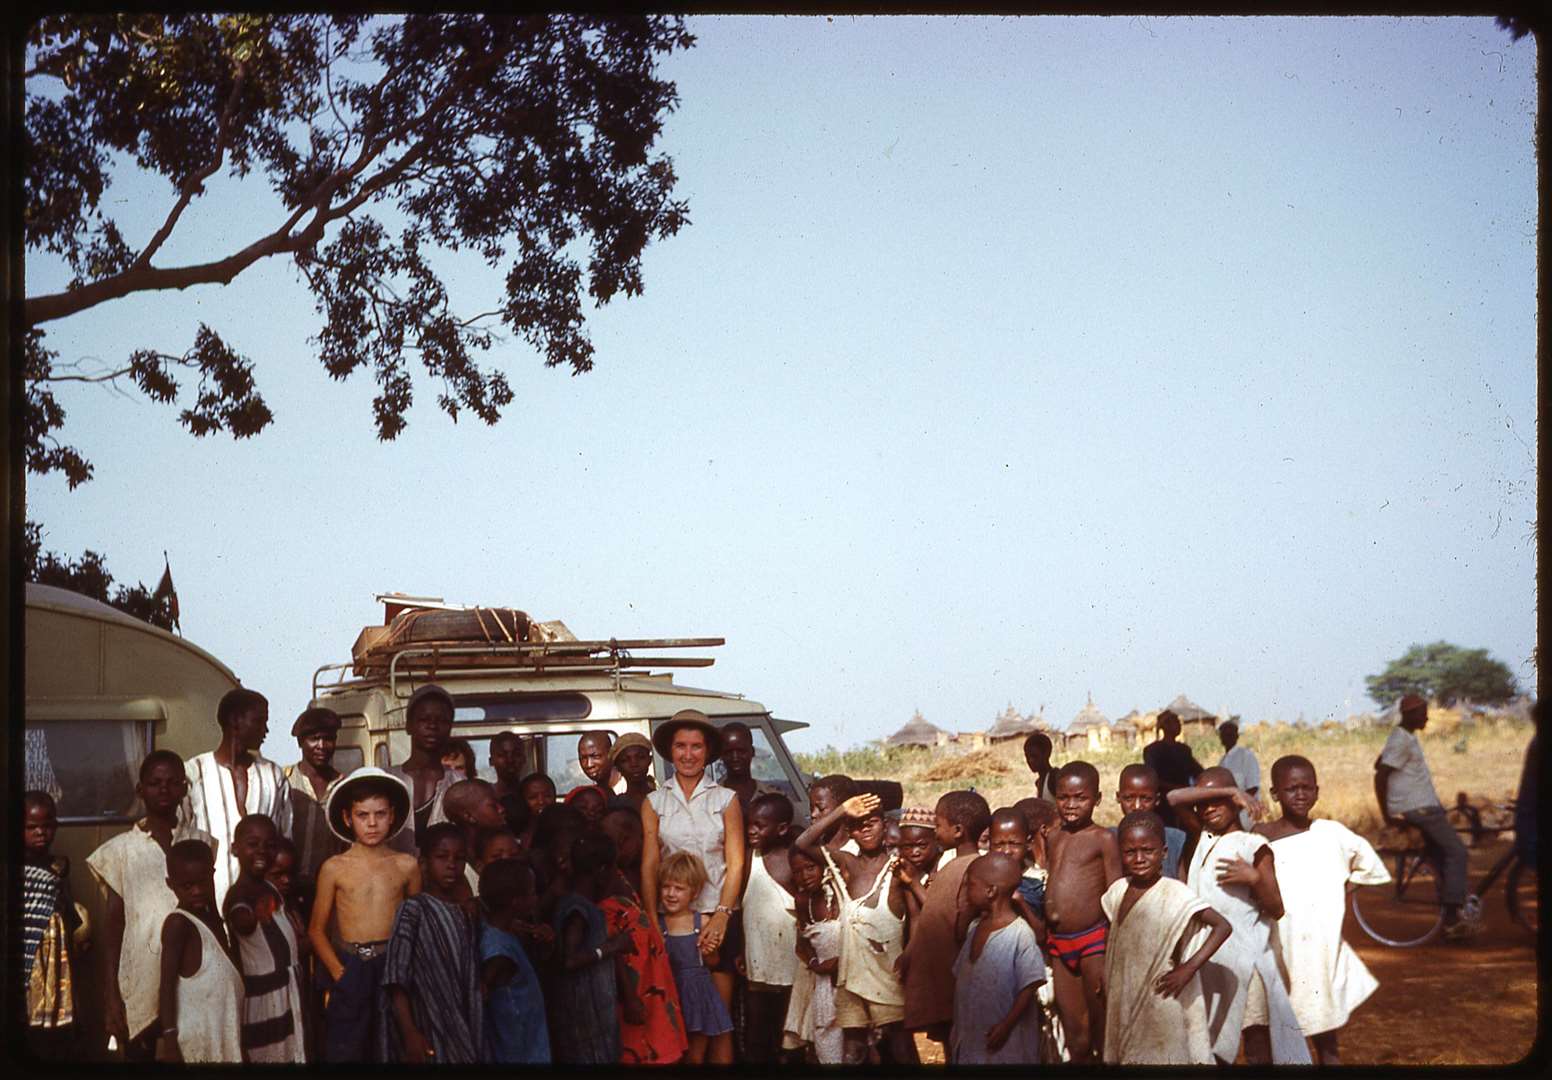 The family in Africa with their Land Rover. Photo: Red 5 Films